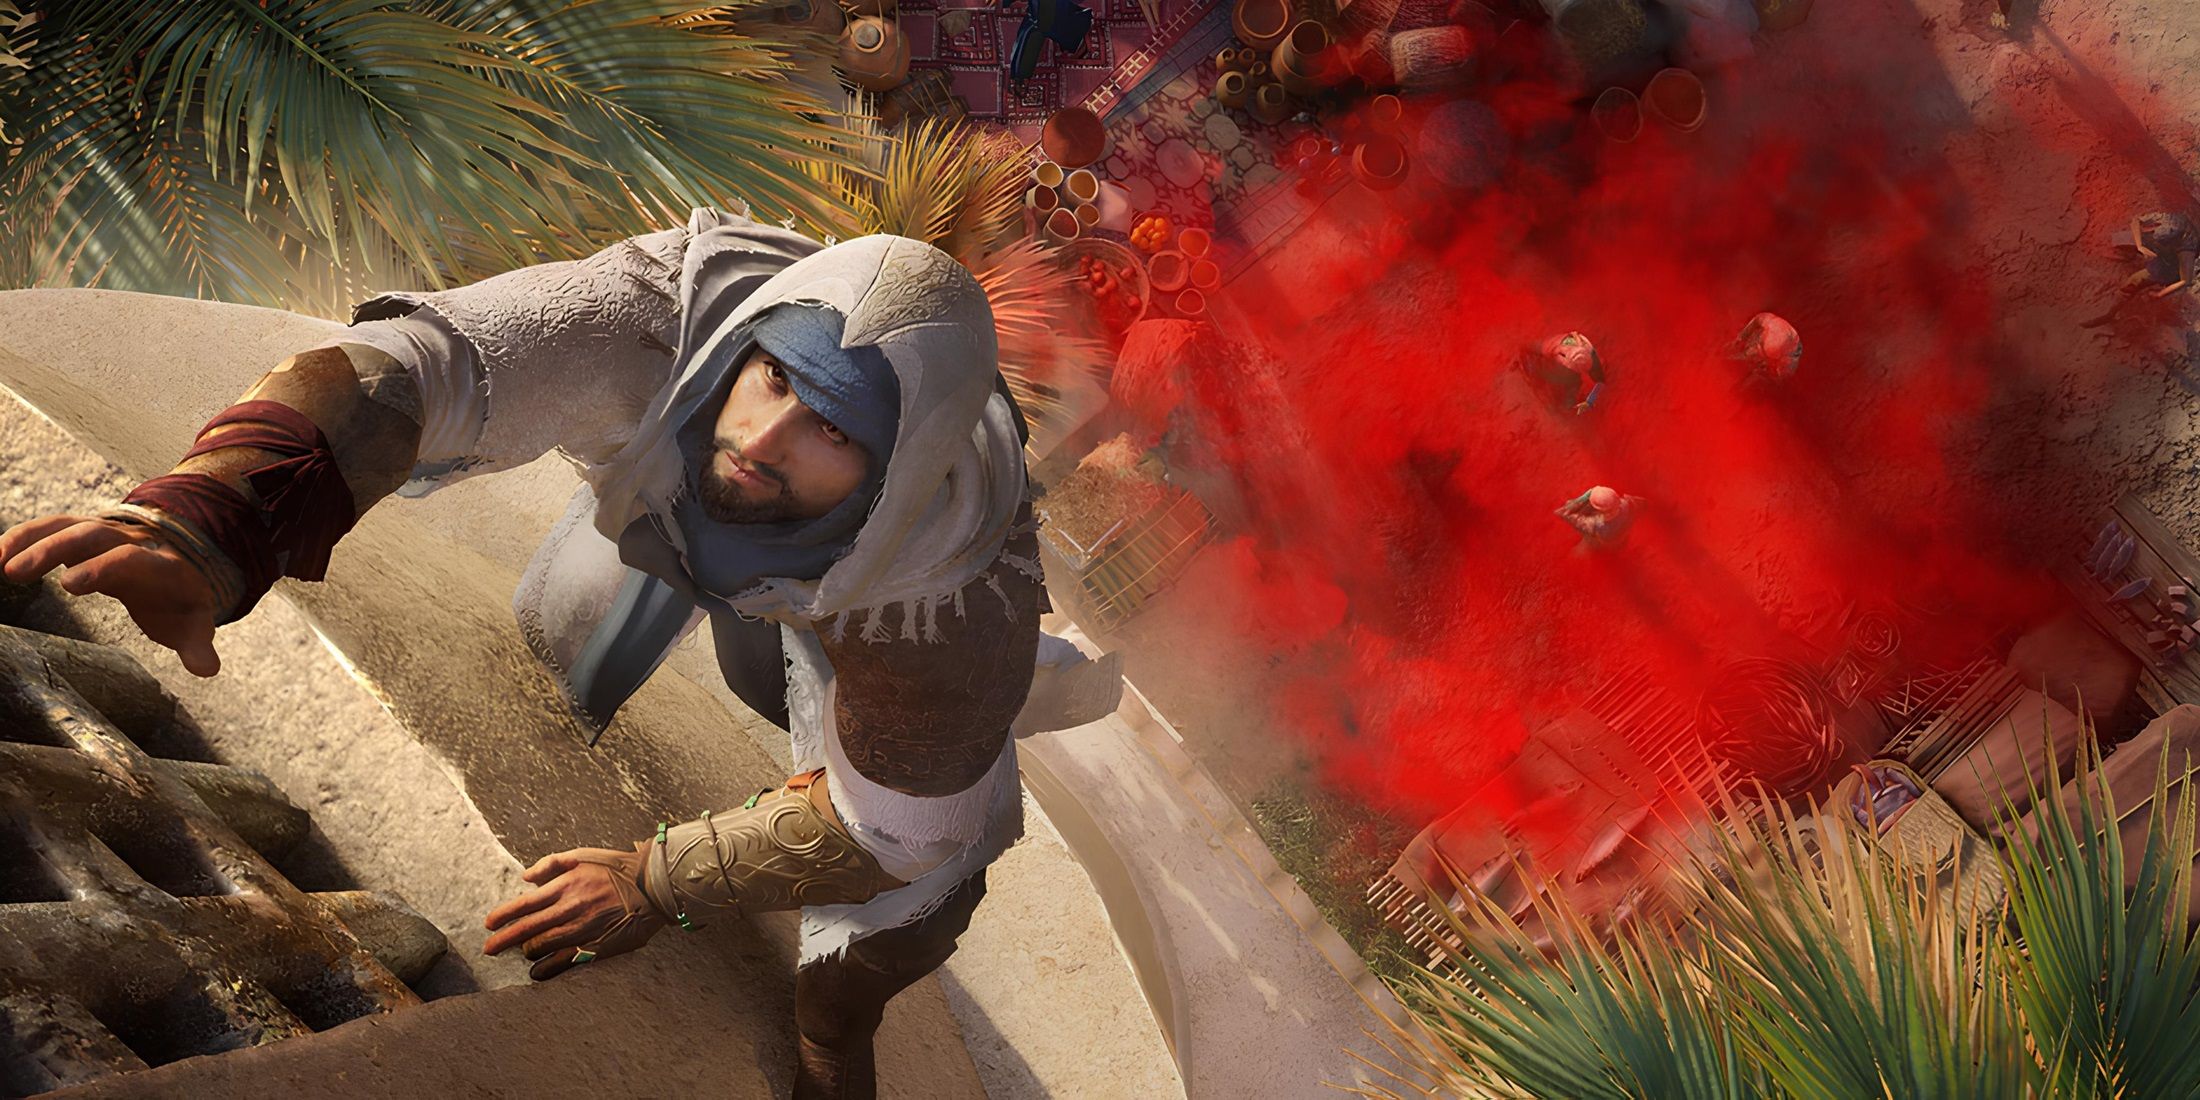 dedicated-assassins-creed-fan-pulls-off-jaw-dropping-feat